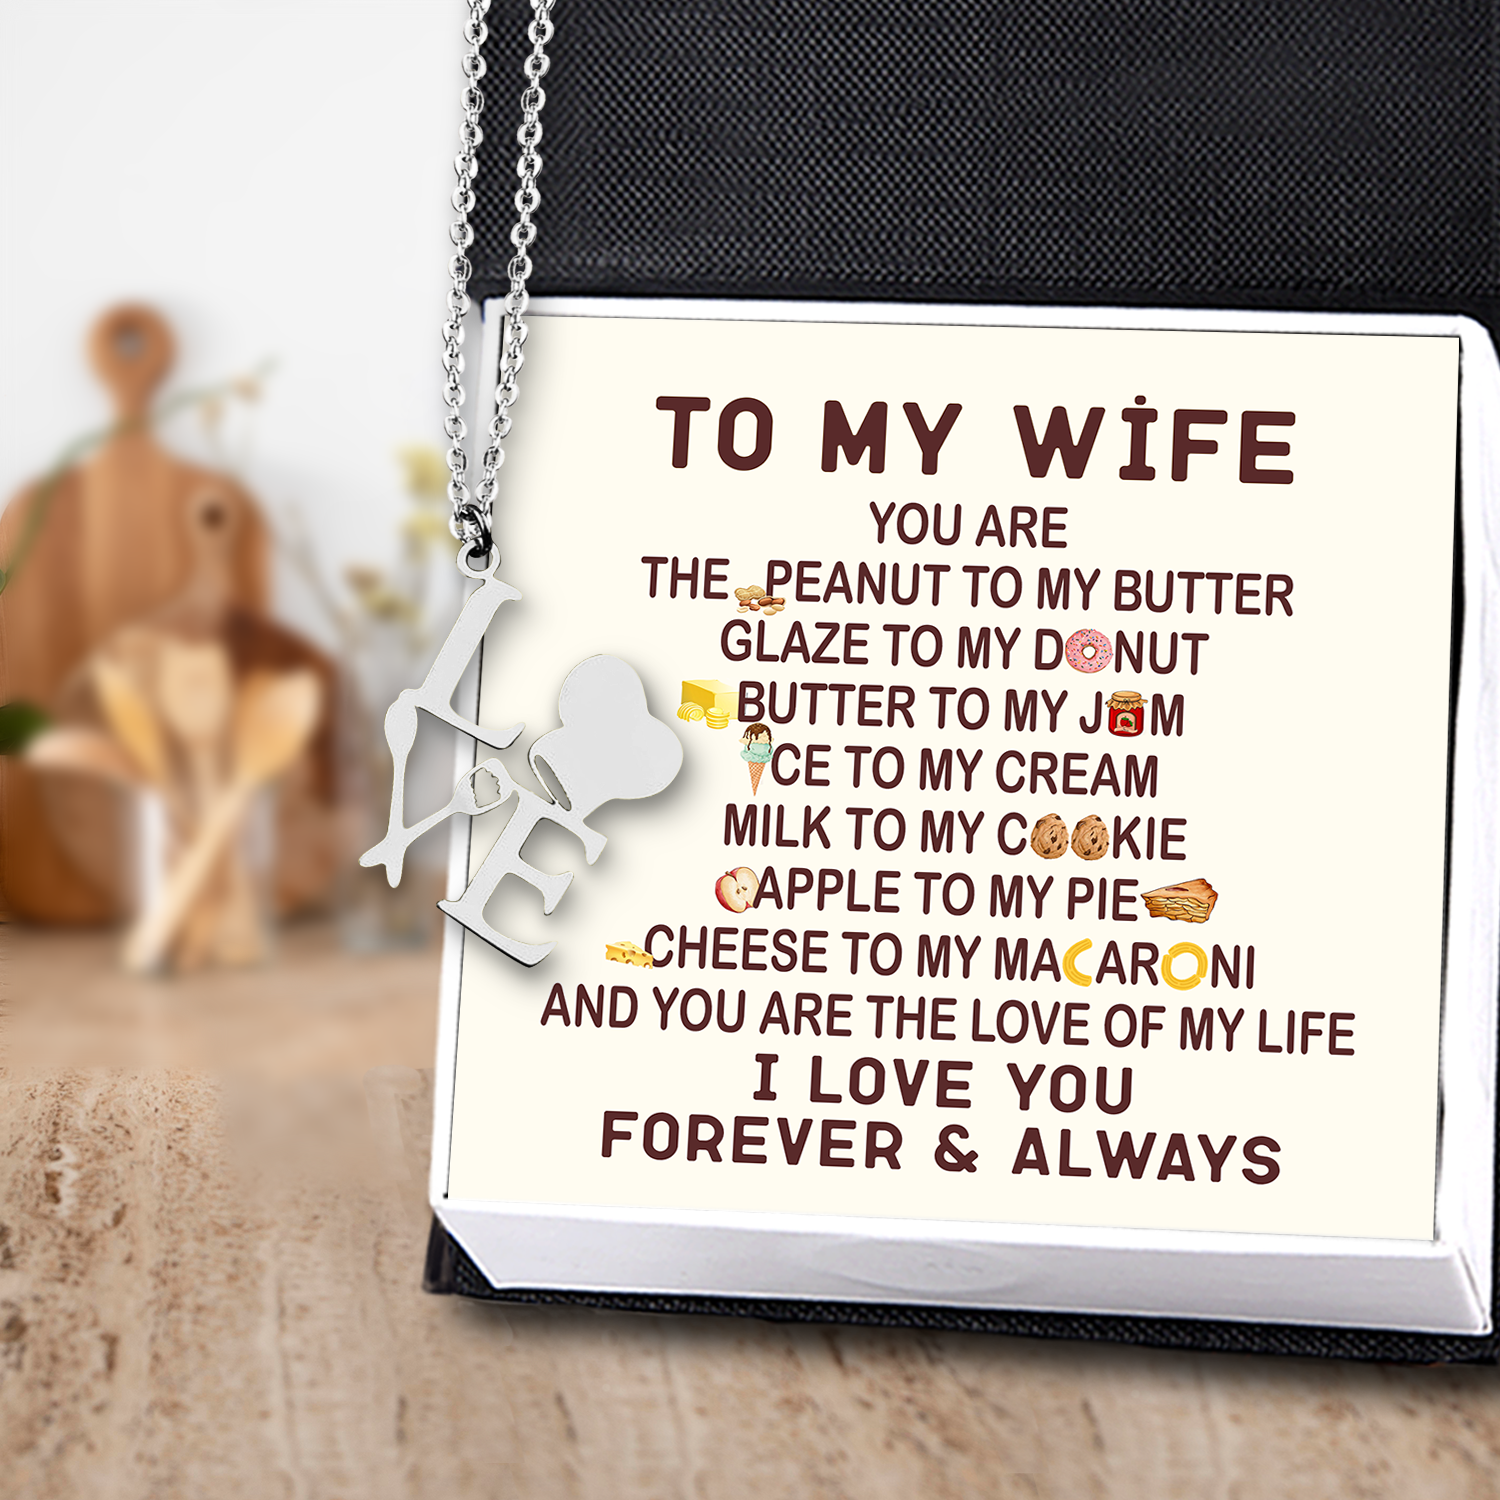 Love Cooking Necklace - Cooking - To My Wife - I Love You Forever & Always - Ukgngf15007